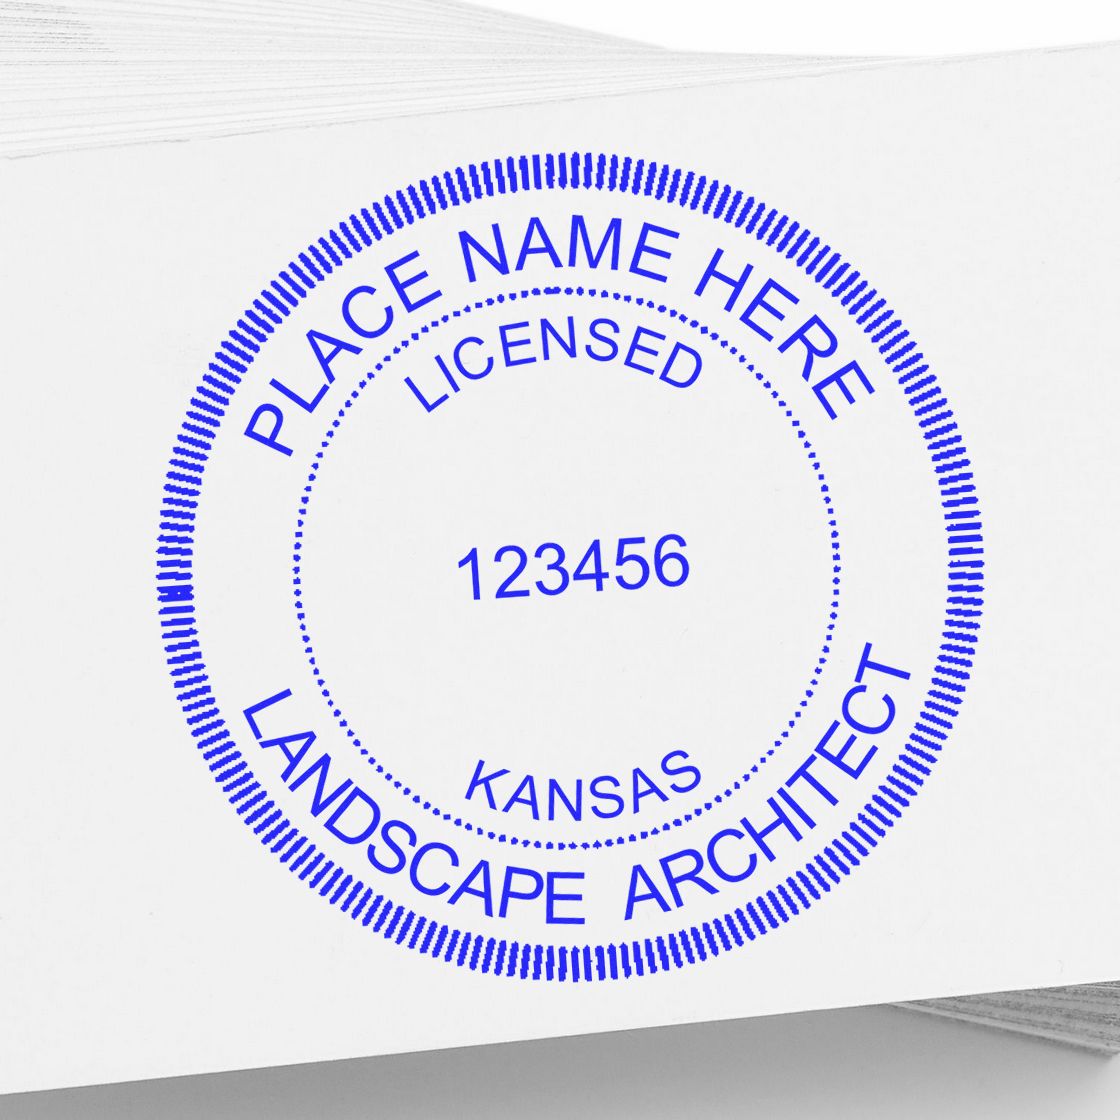 This paper is stamped with a sample imprint of the Self-Inking Kansas Landscape Architect Stamp, signifying its quality and reliability.